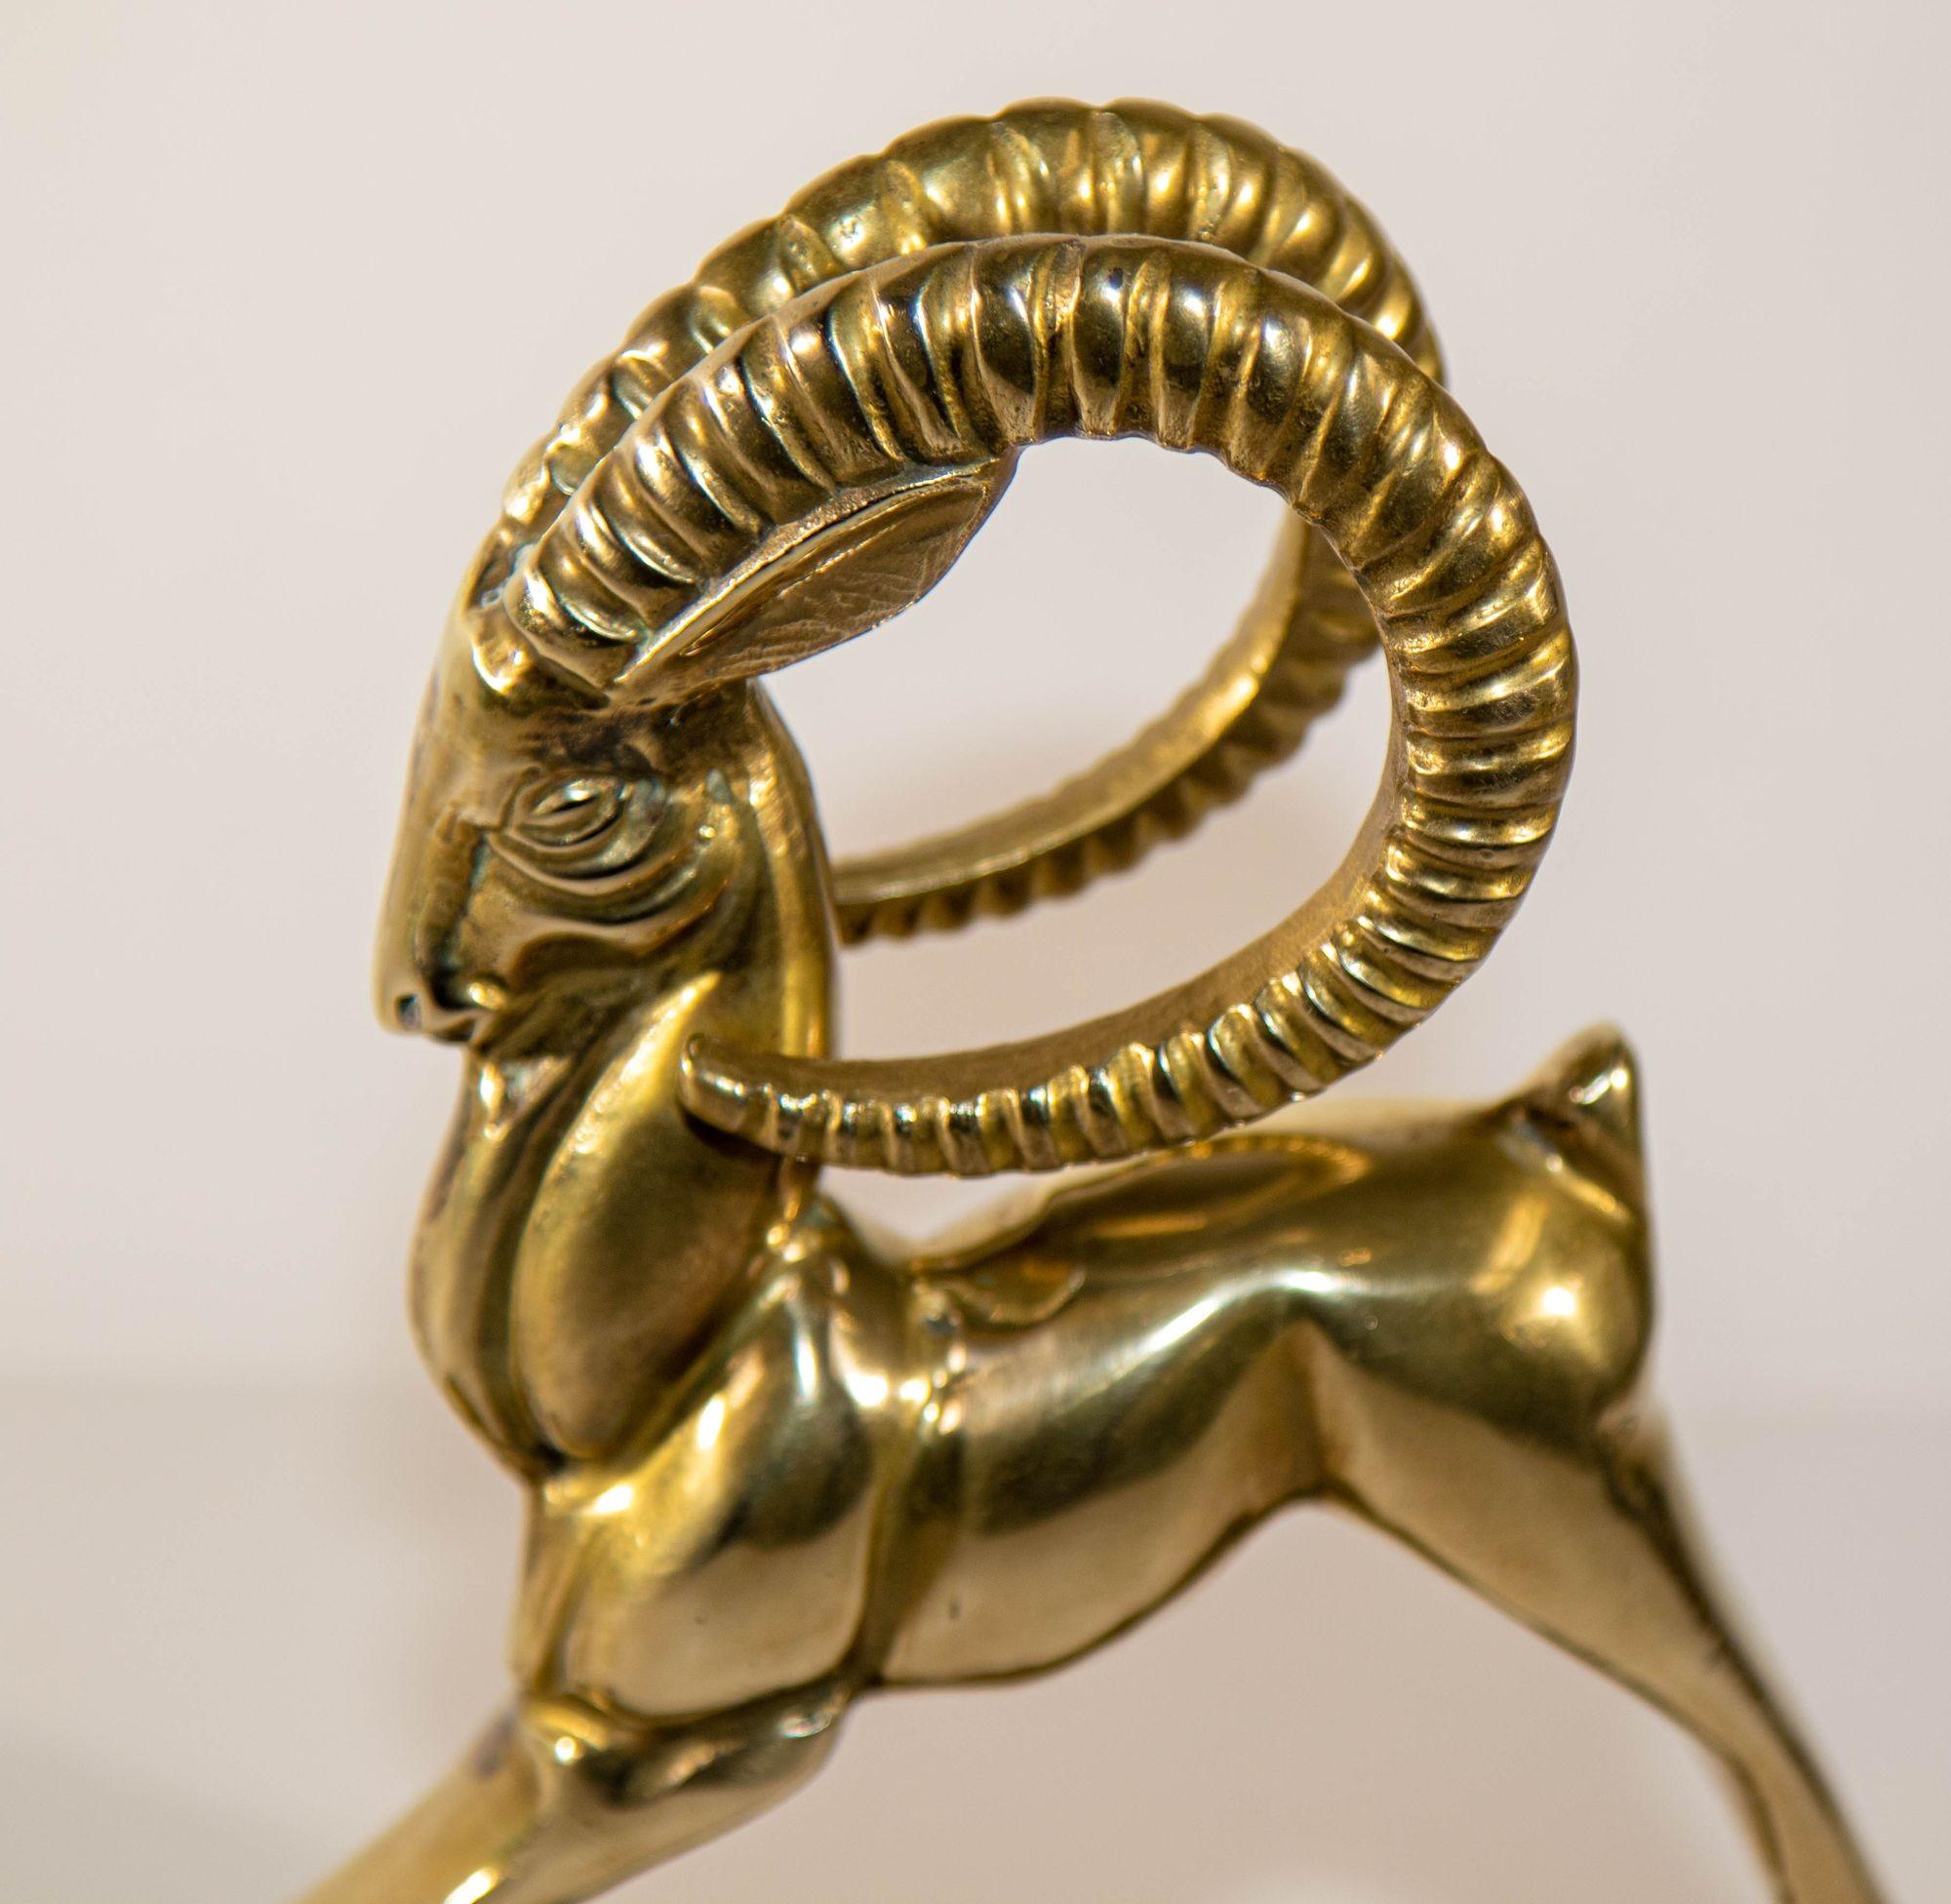 Vintage French Art Deco Style Sculpture of Brass Ibex Antelope For Sale 2